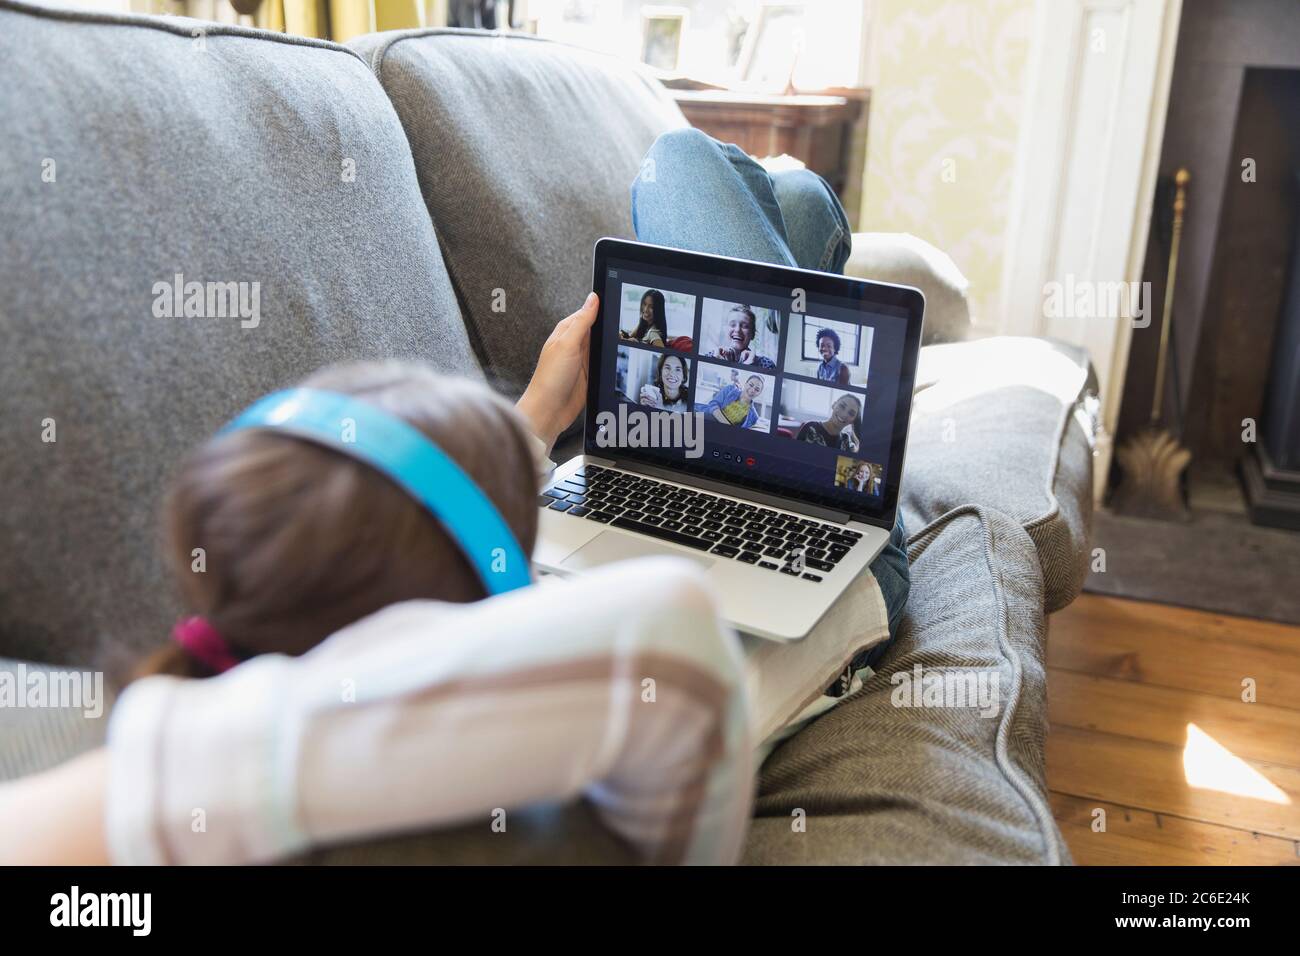 Friends video chatting on laptop screen on living room sofa Stock Photo